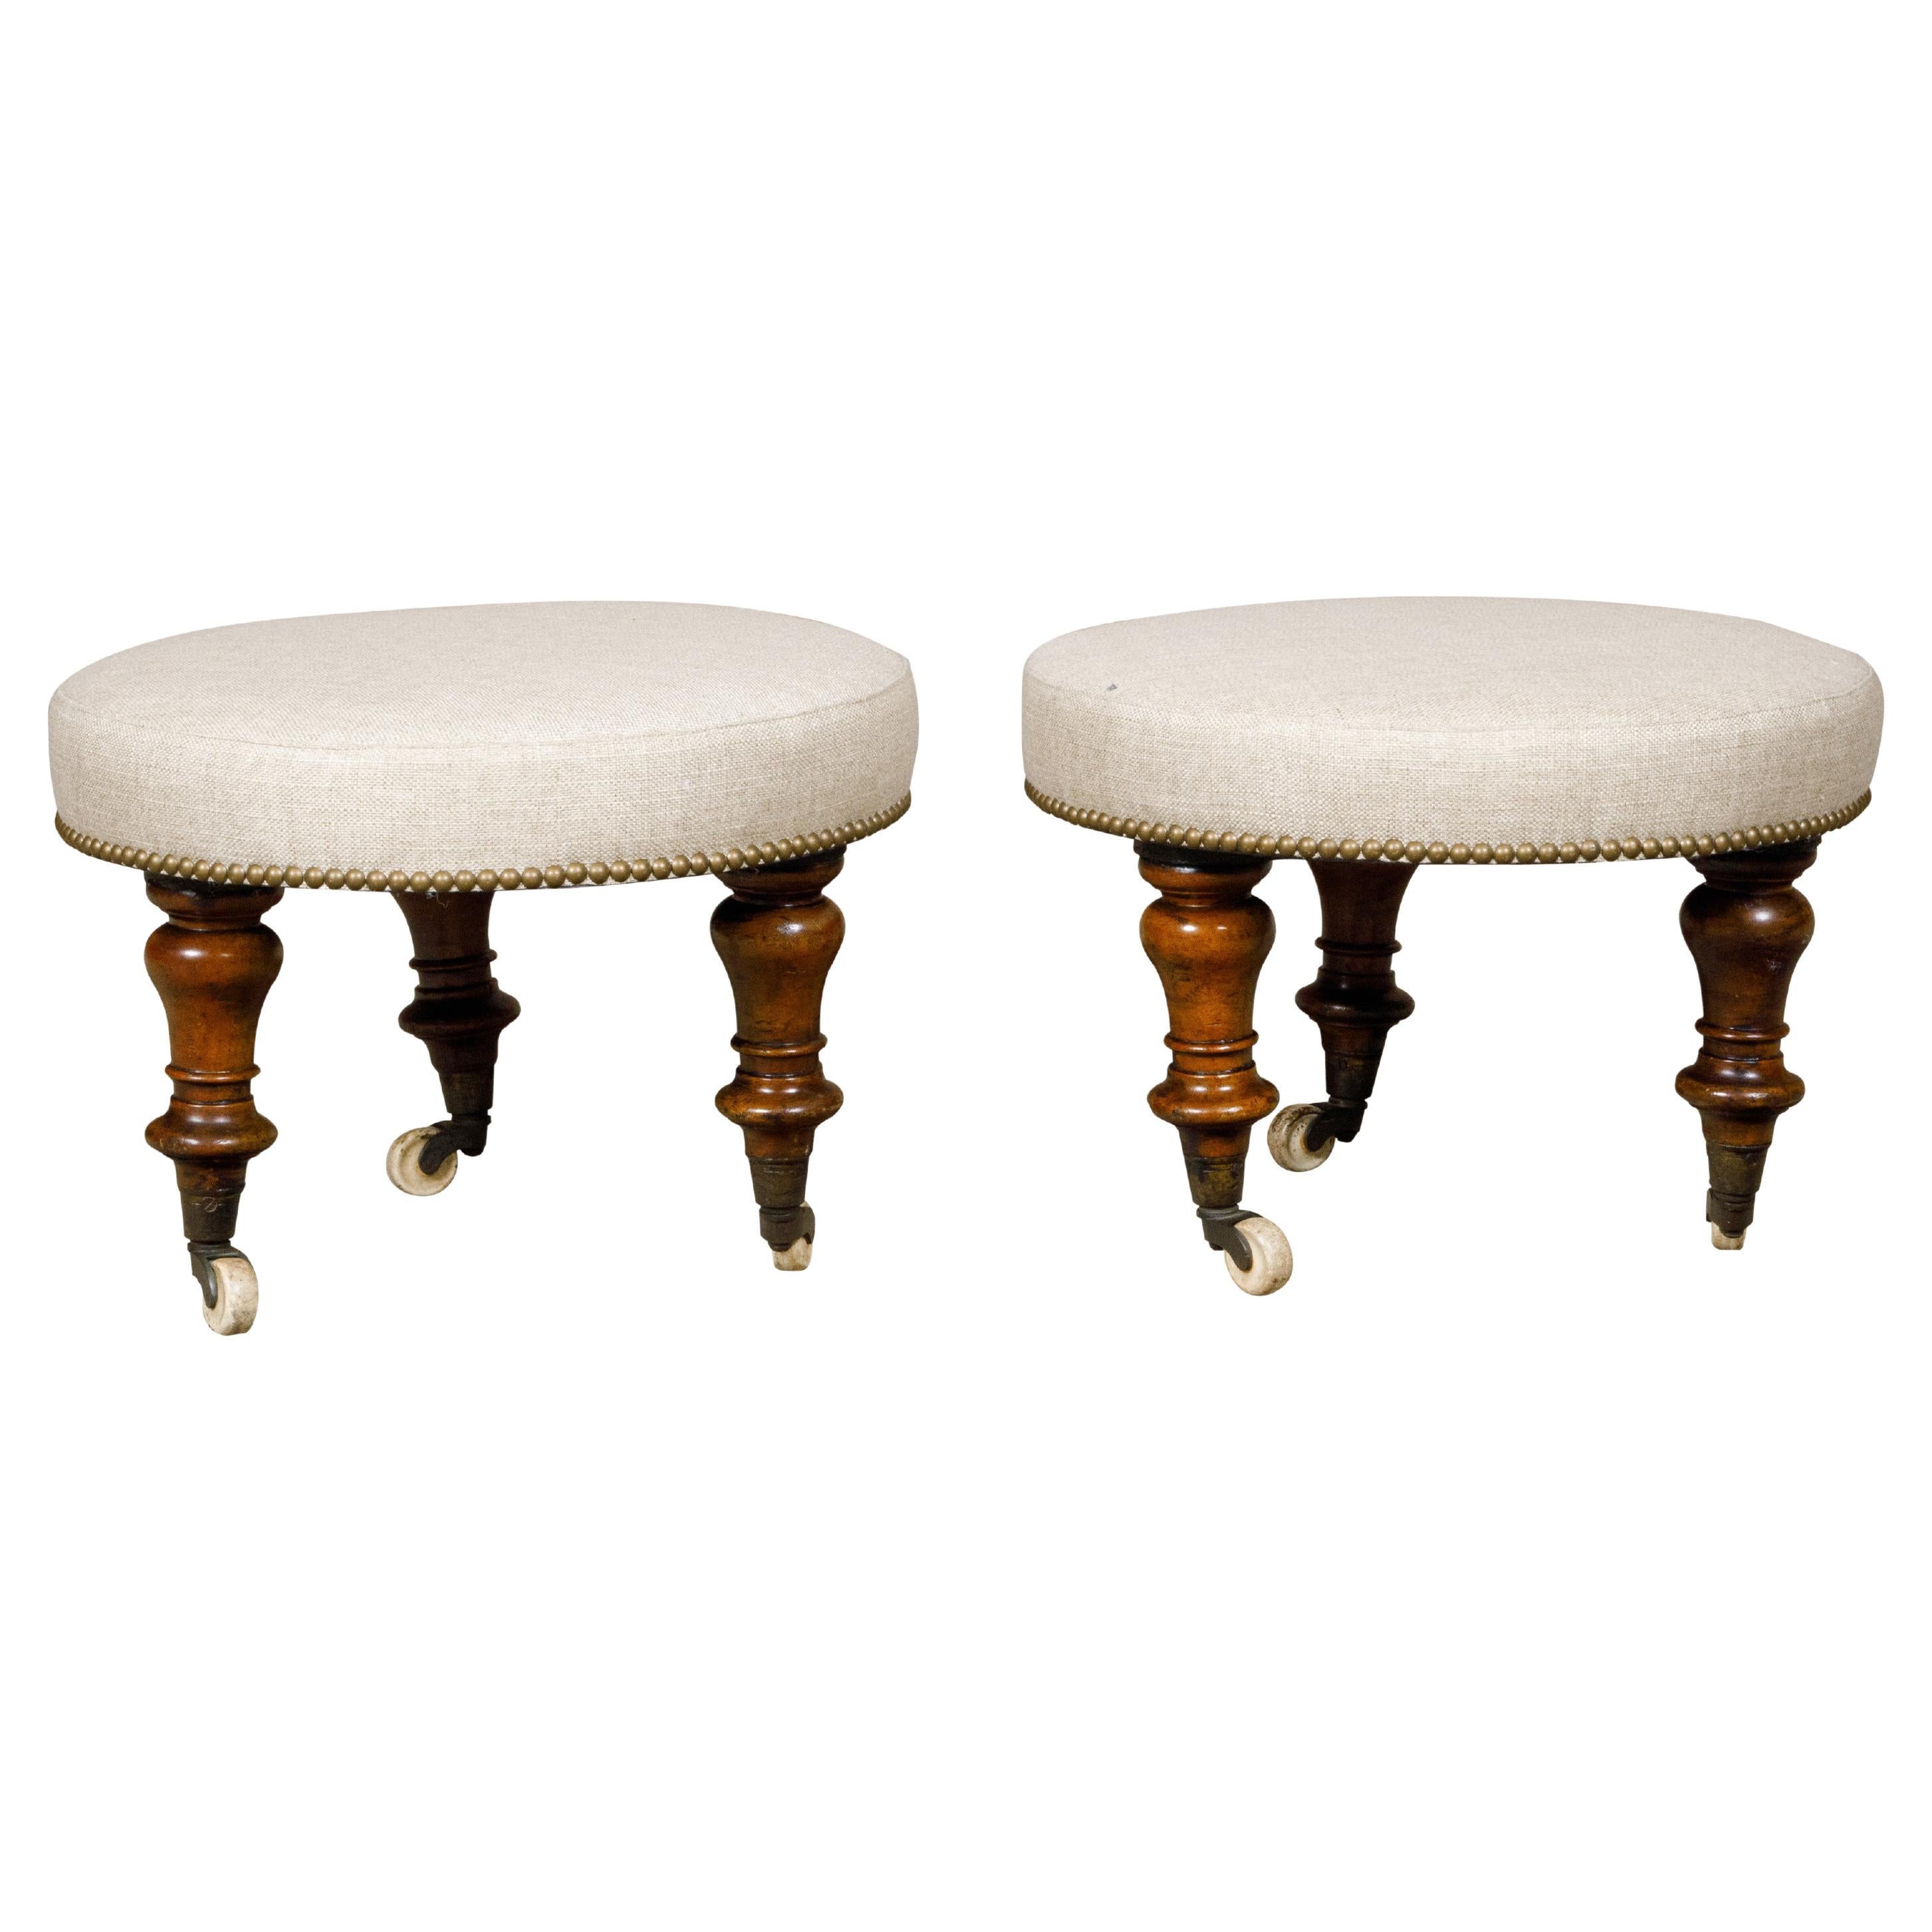 Pair of English Mahogany Stools with 19th Century Turned Legs on Casters For Sale